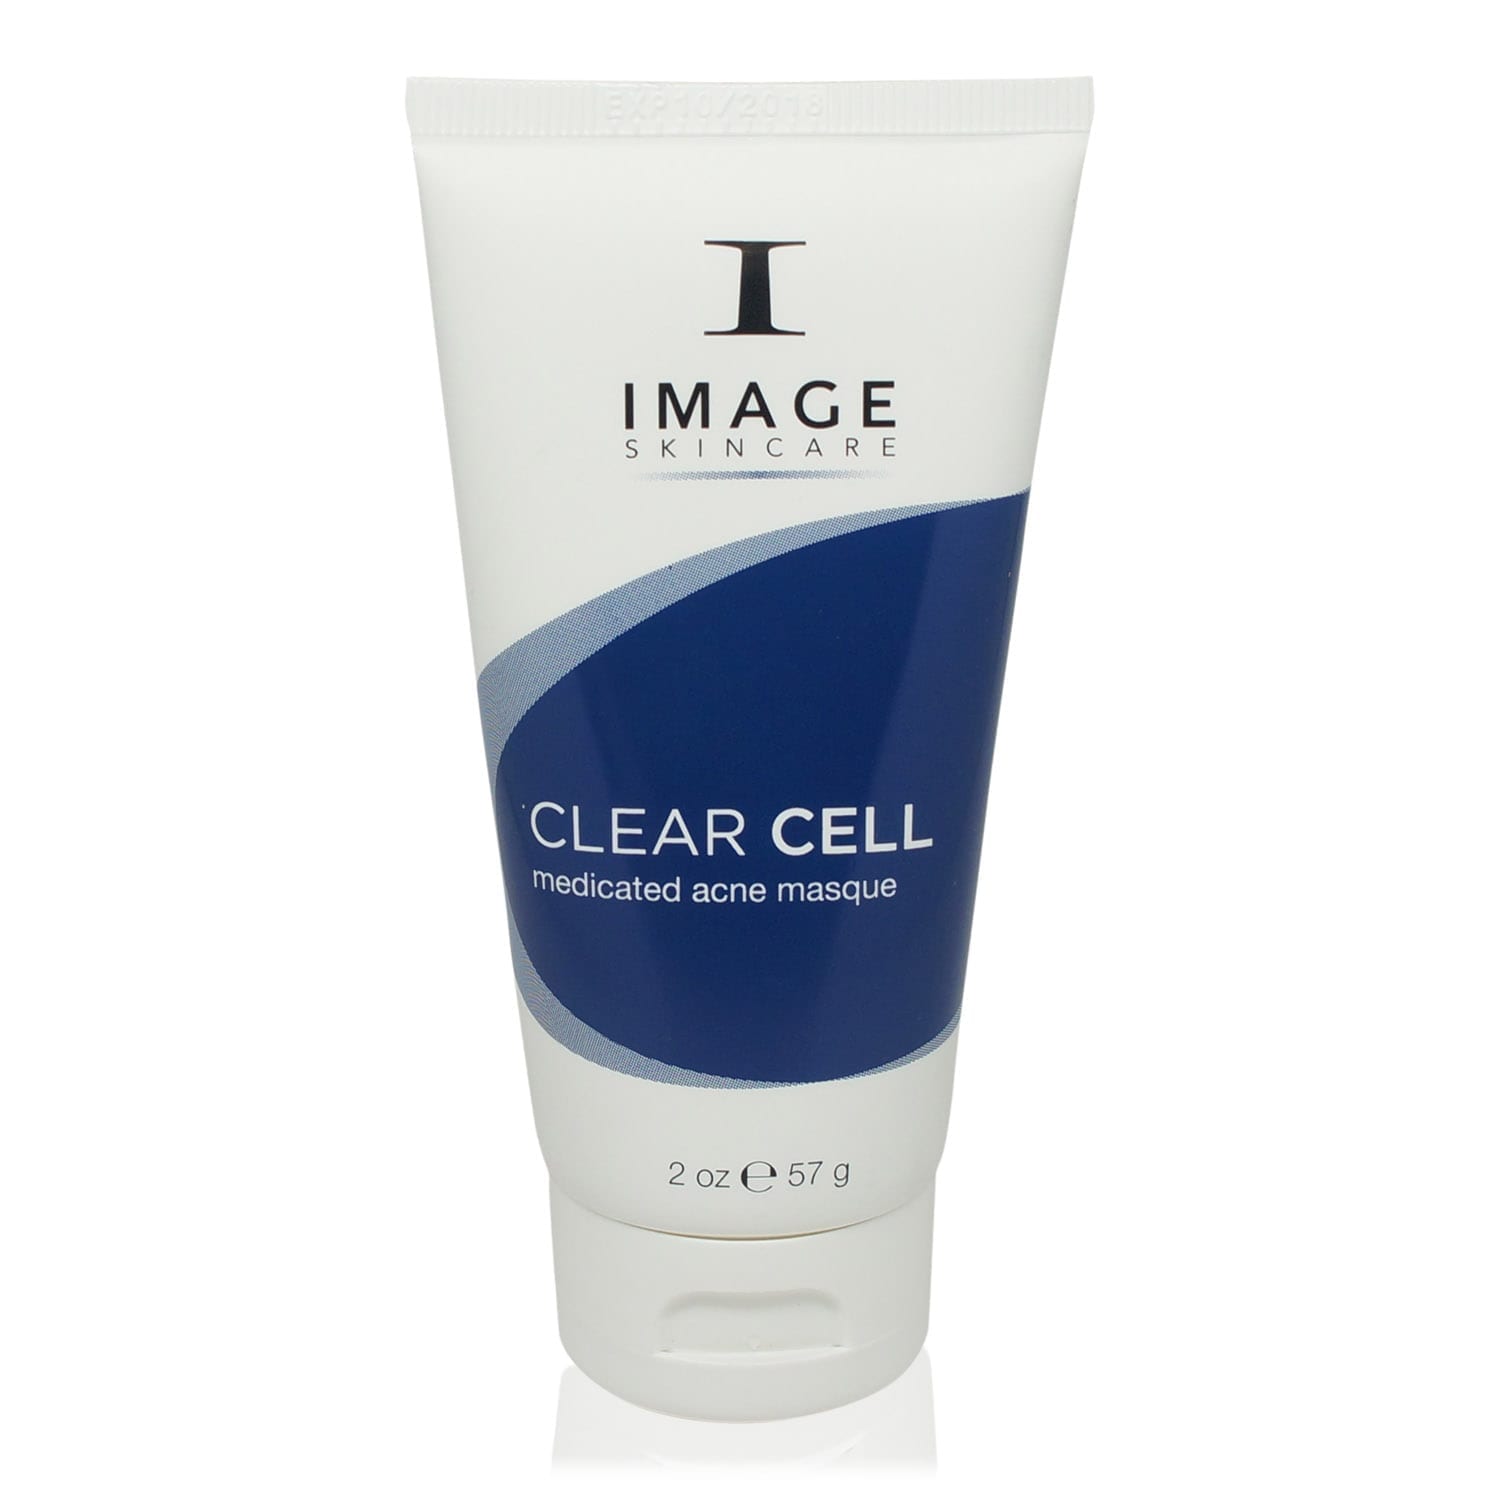 IMAGE Skincare Clear Cell Medicated Acne Masque 2 oz front view of product